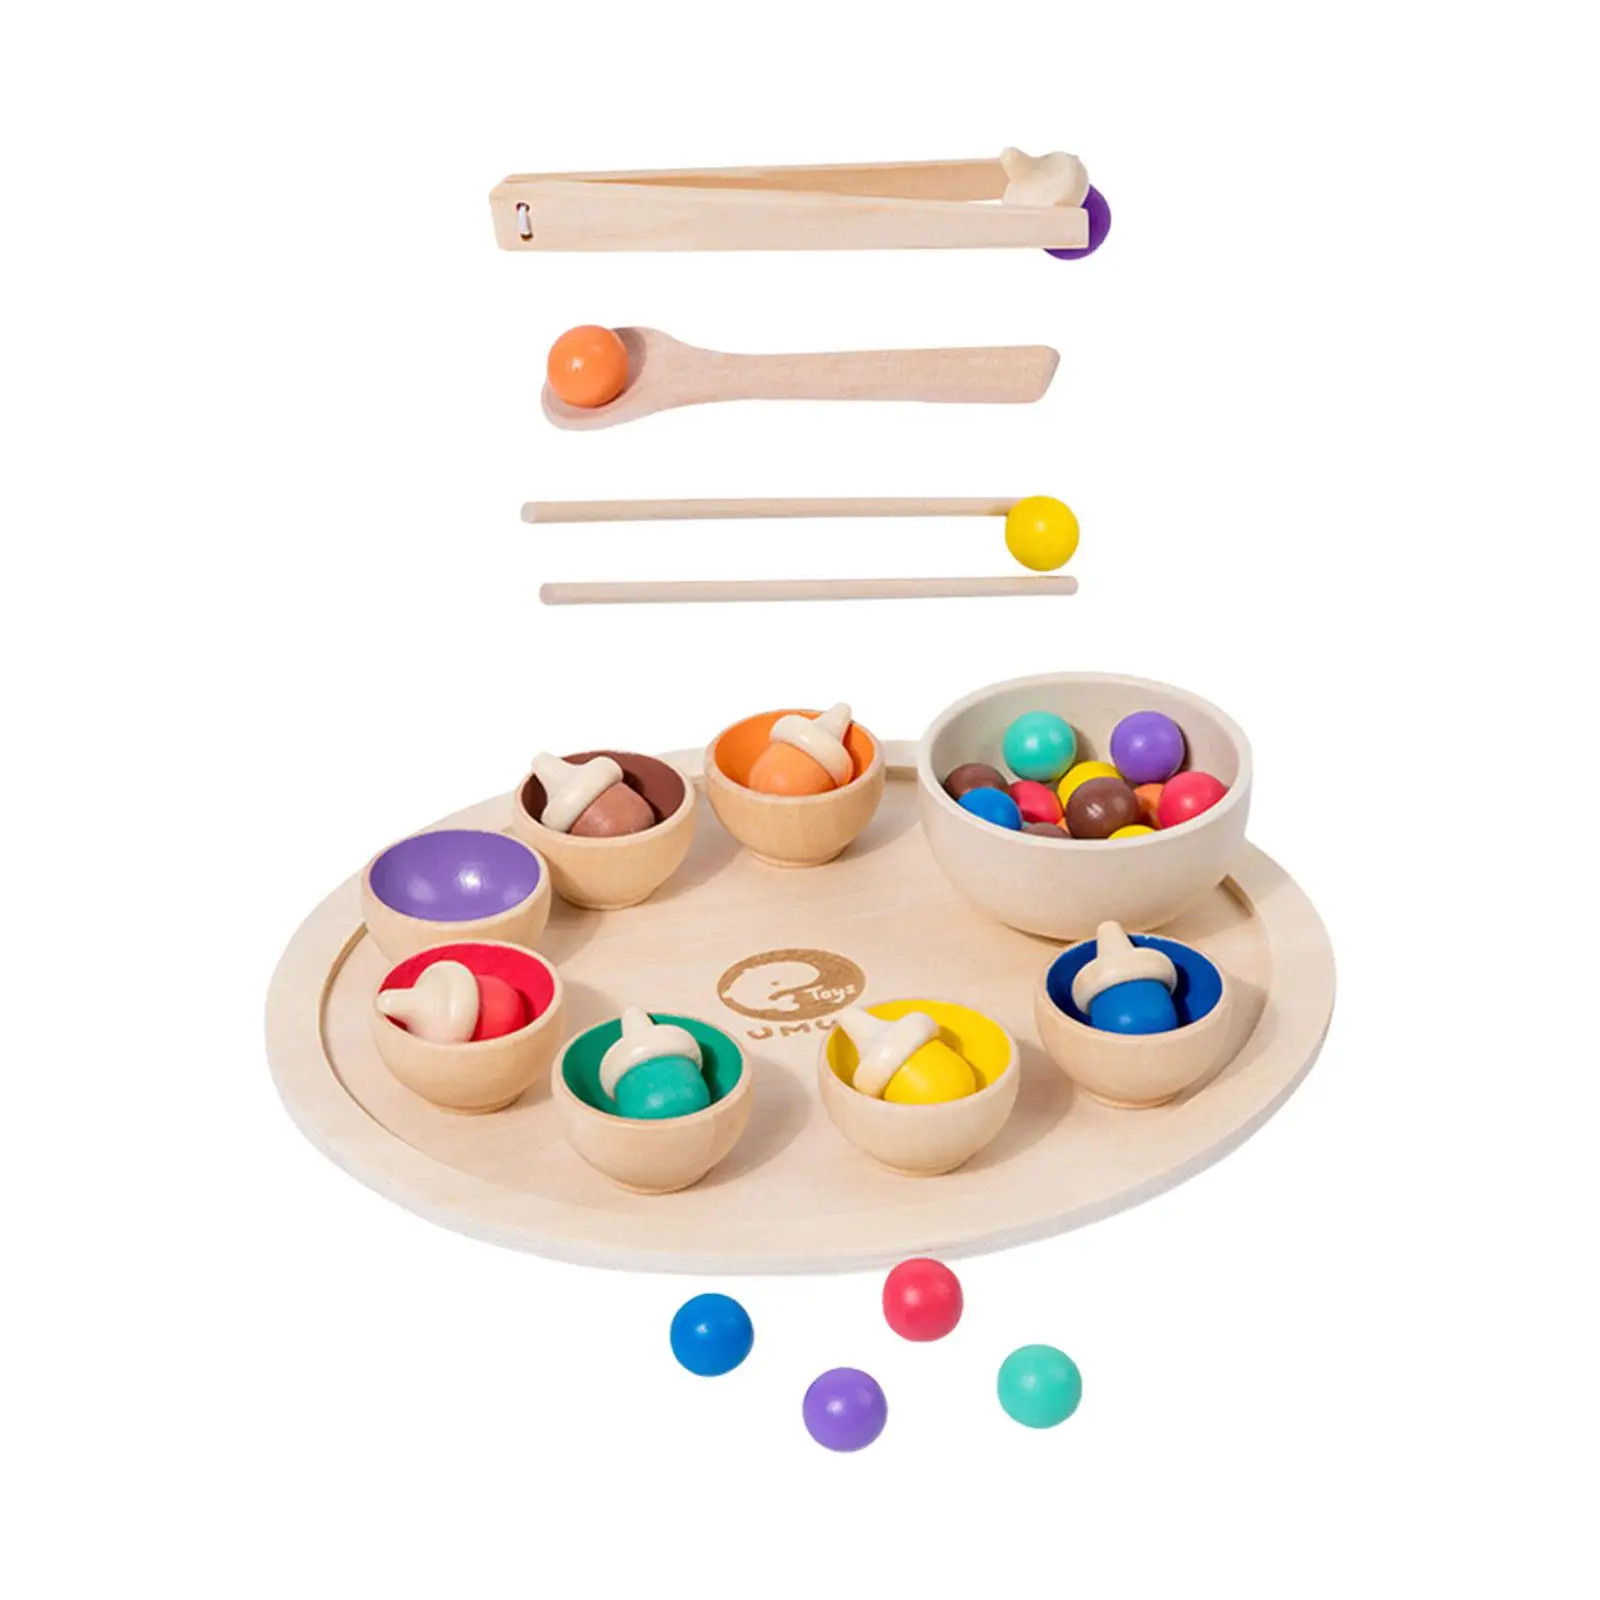 Montessori Bowls Toy Balls Matching Color Sorting and Counting for Baby Kids